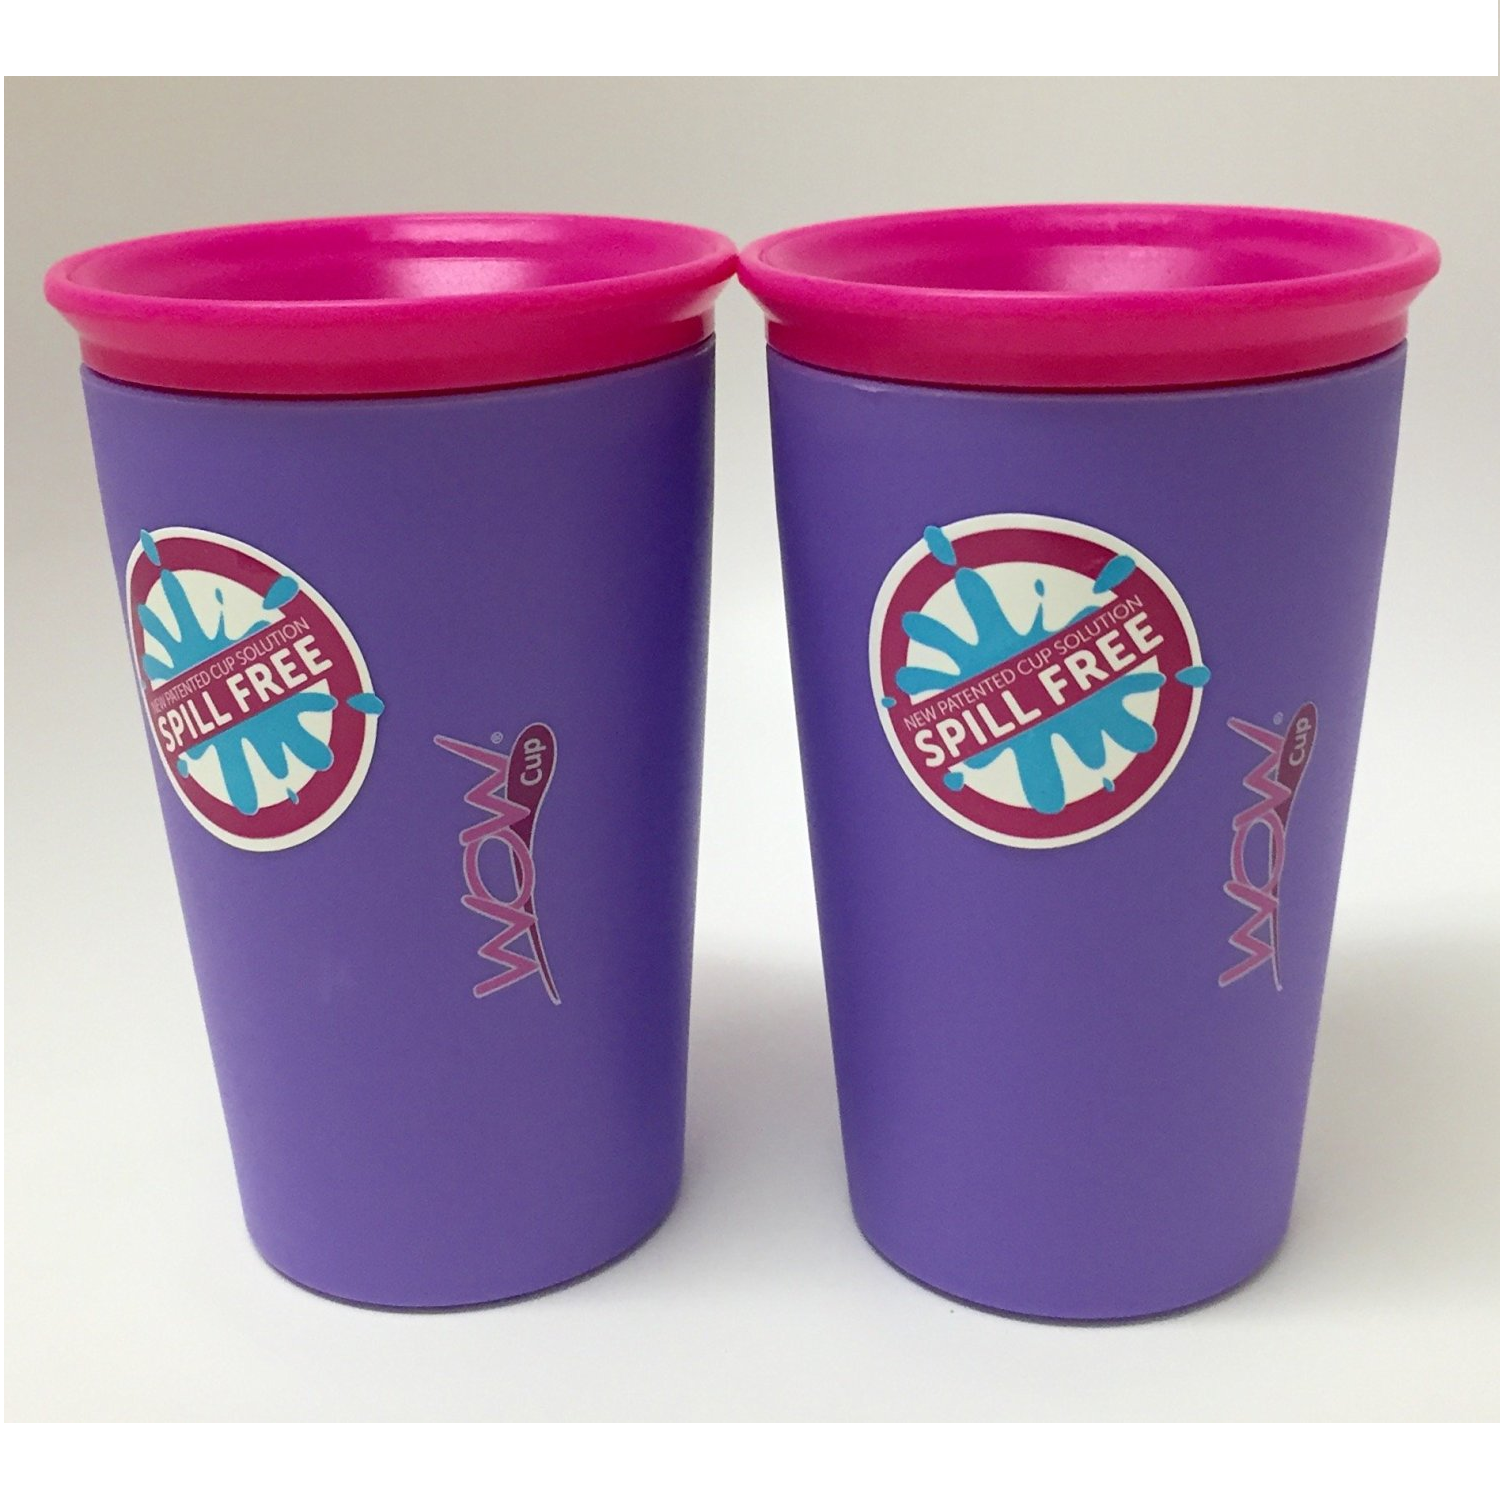 Amazon: Wow Cups (2 Count) Just $7.49! Spill Proof with 360 Degree Drinking Edge!